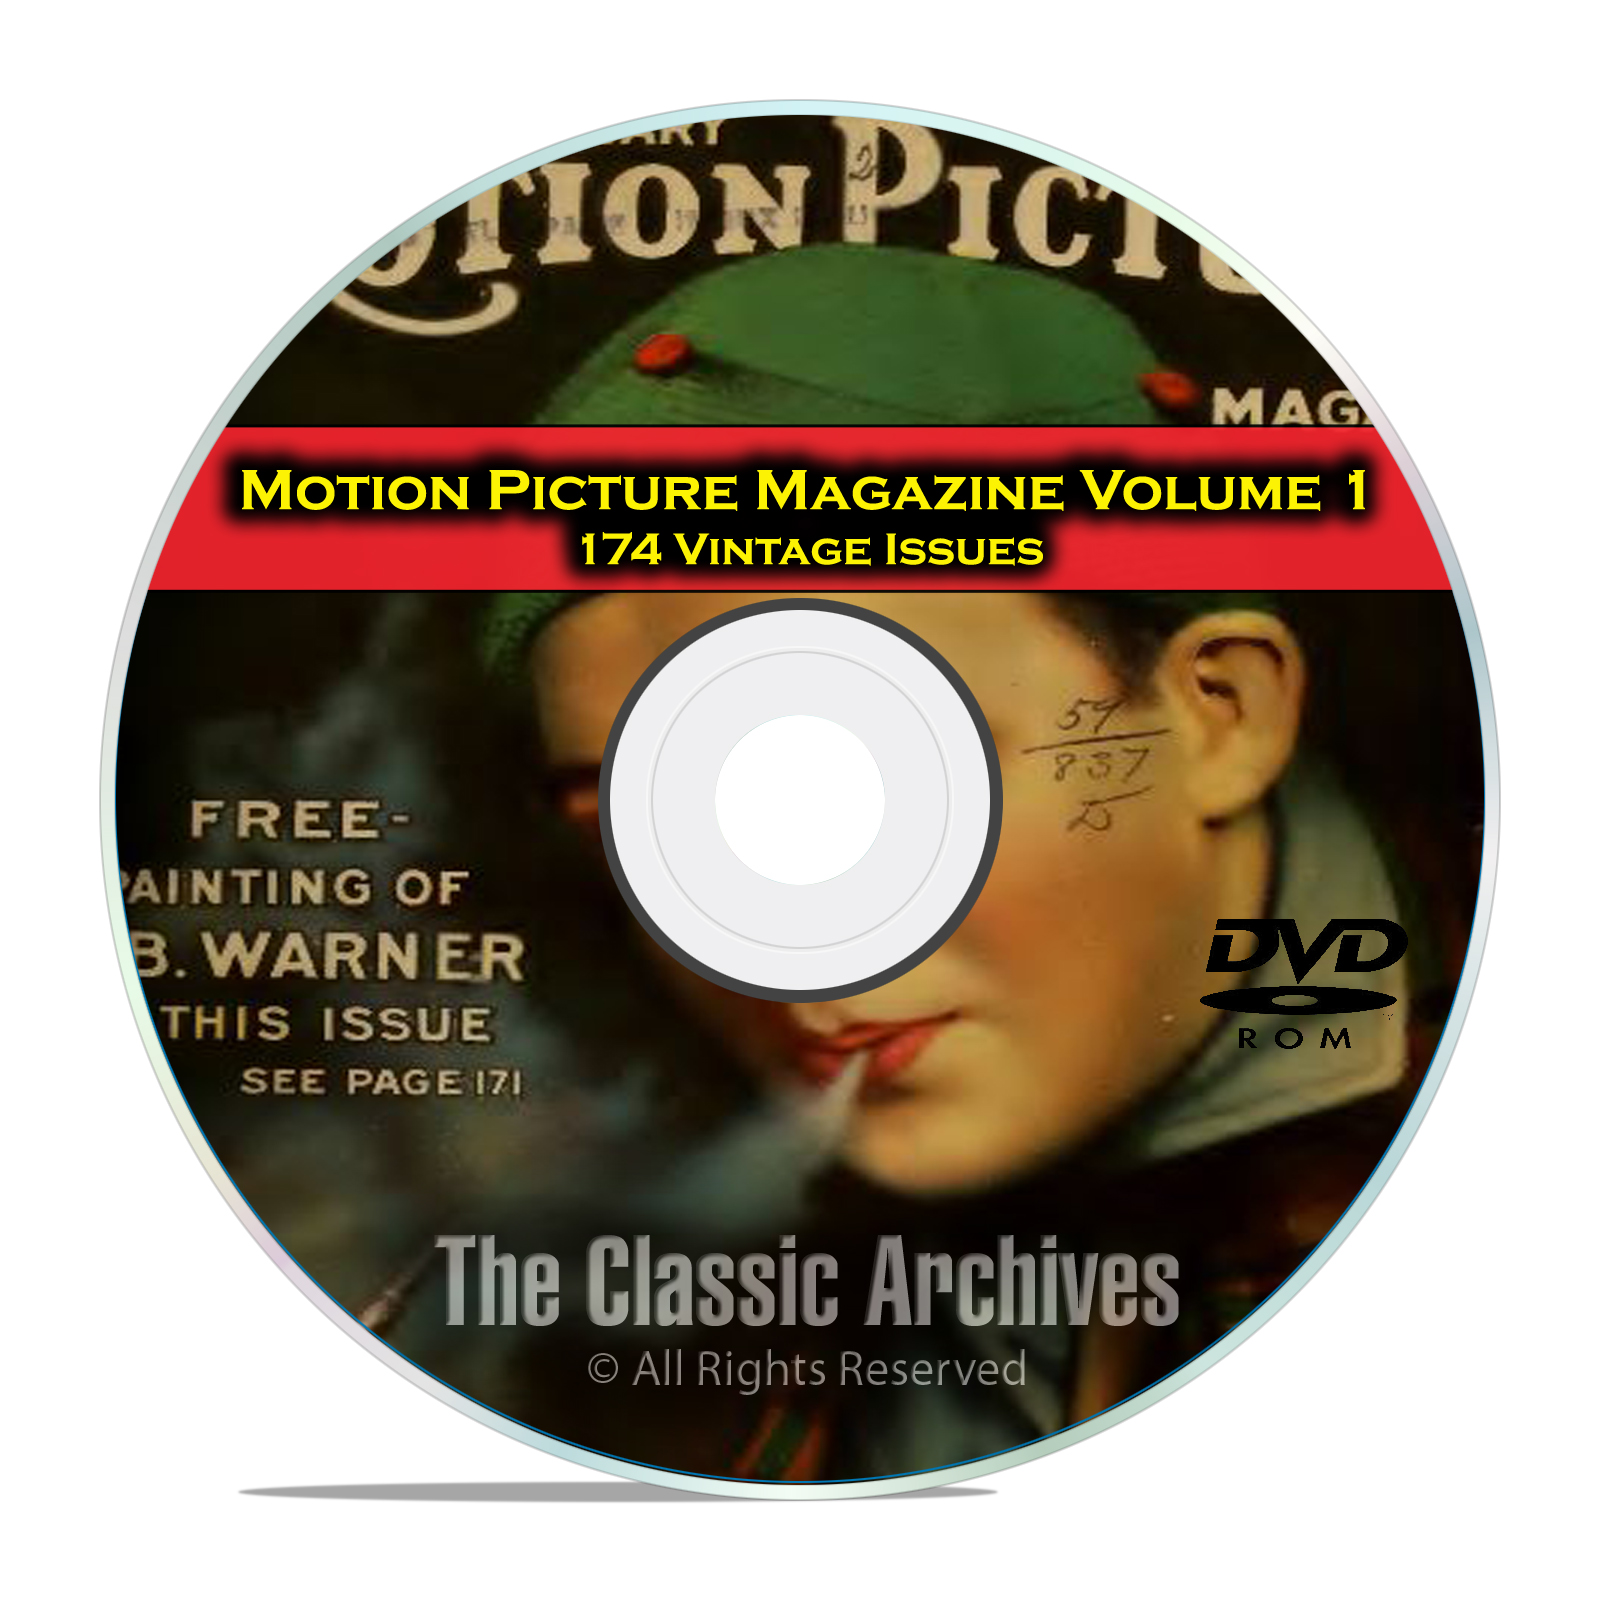 Motion Picture Movie Magazine, Volume 1, 174 Issues, 1911 - 1925, DVD